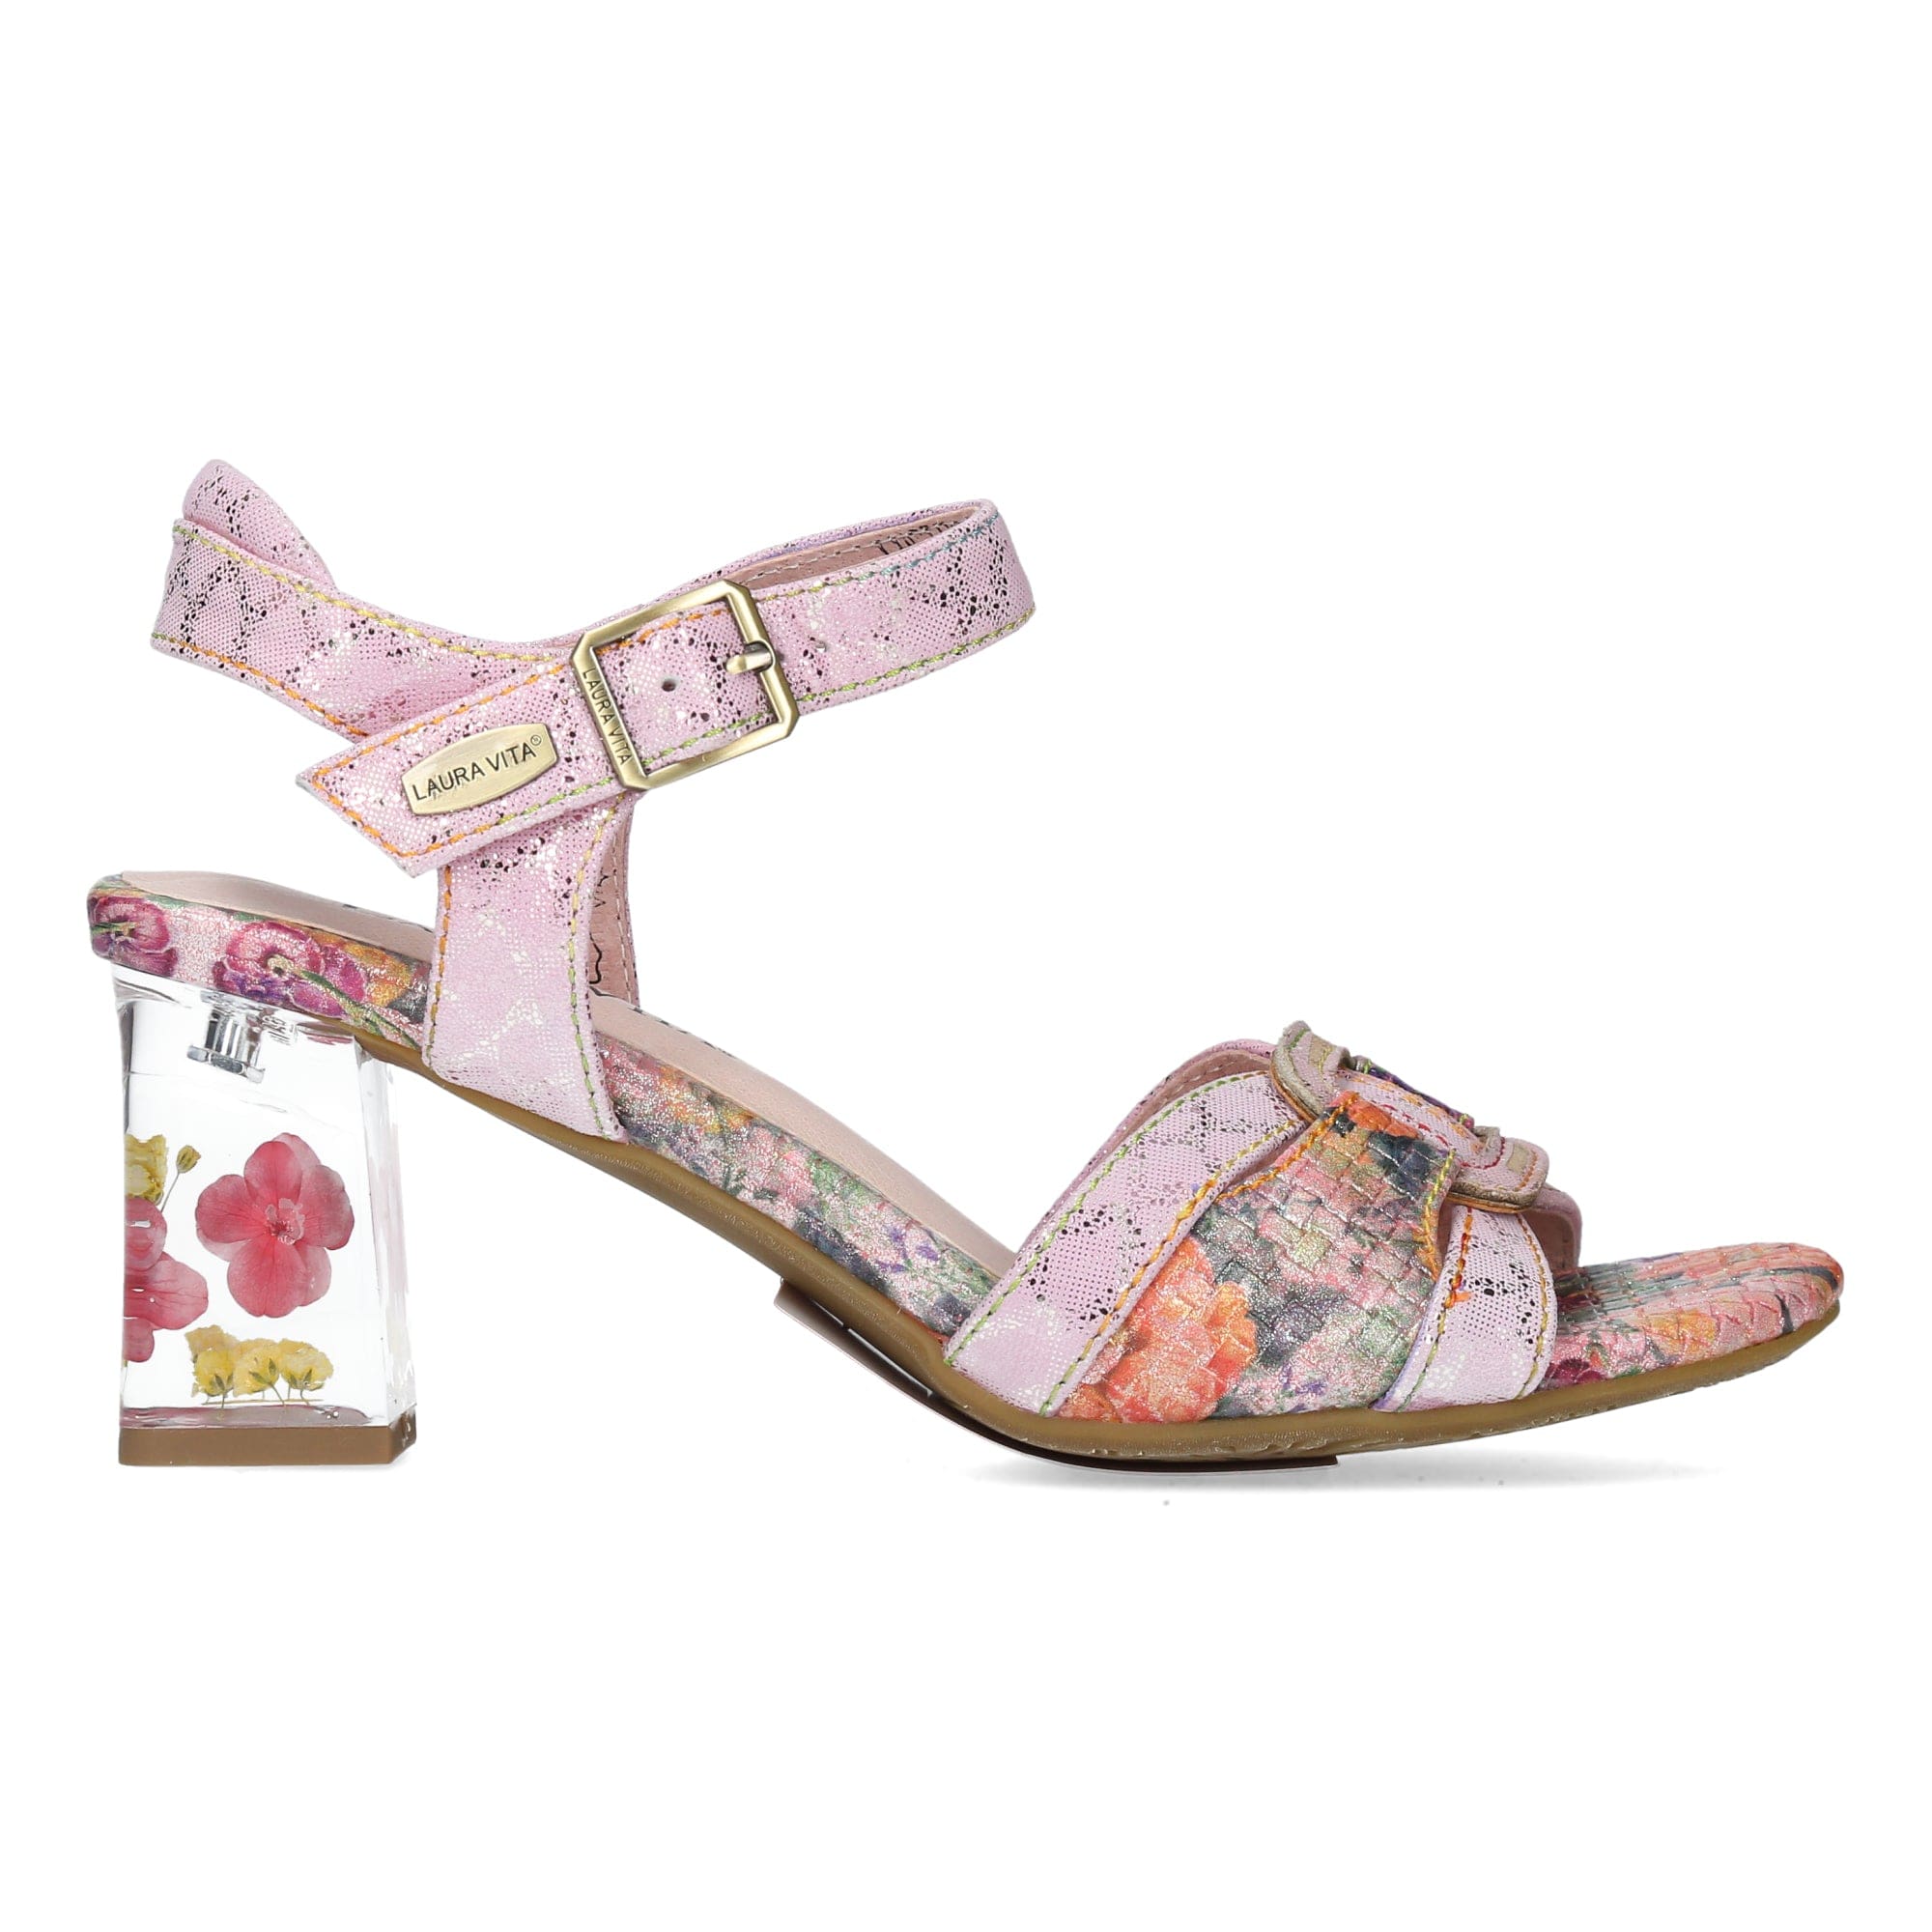 Chaussures LUCIEO 06 - 35 / Rose - Sandale